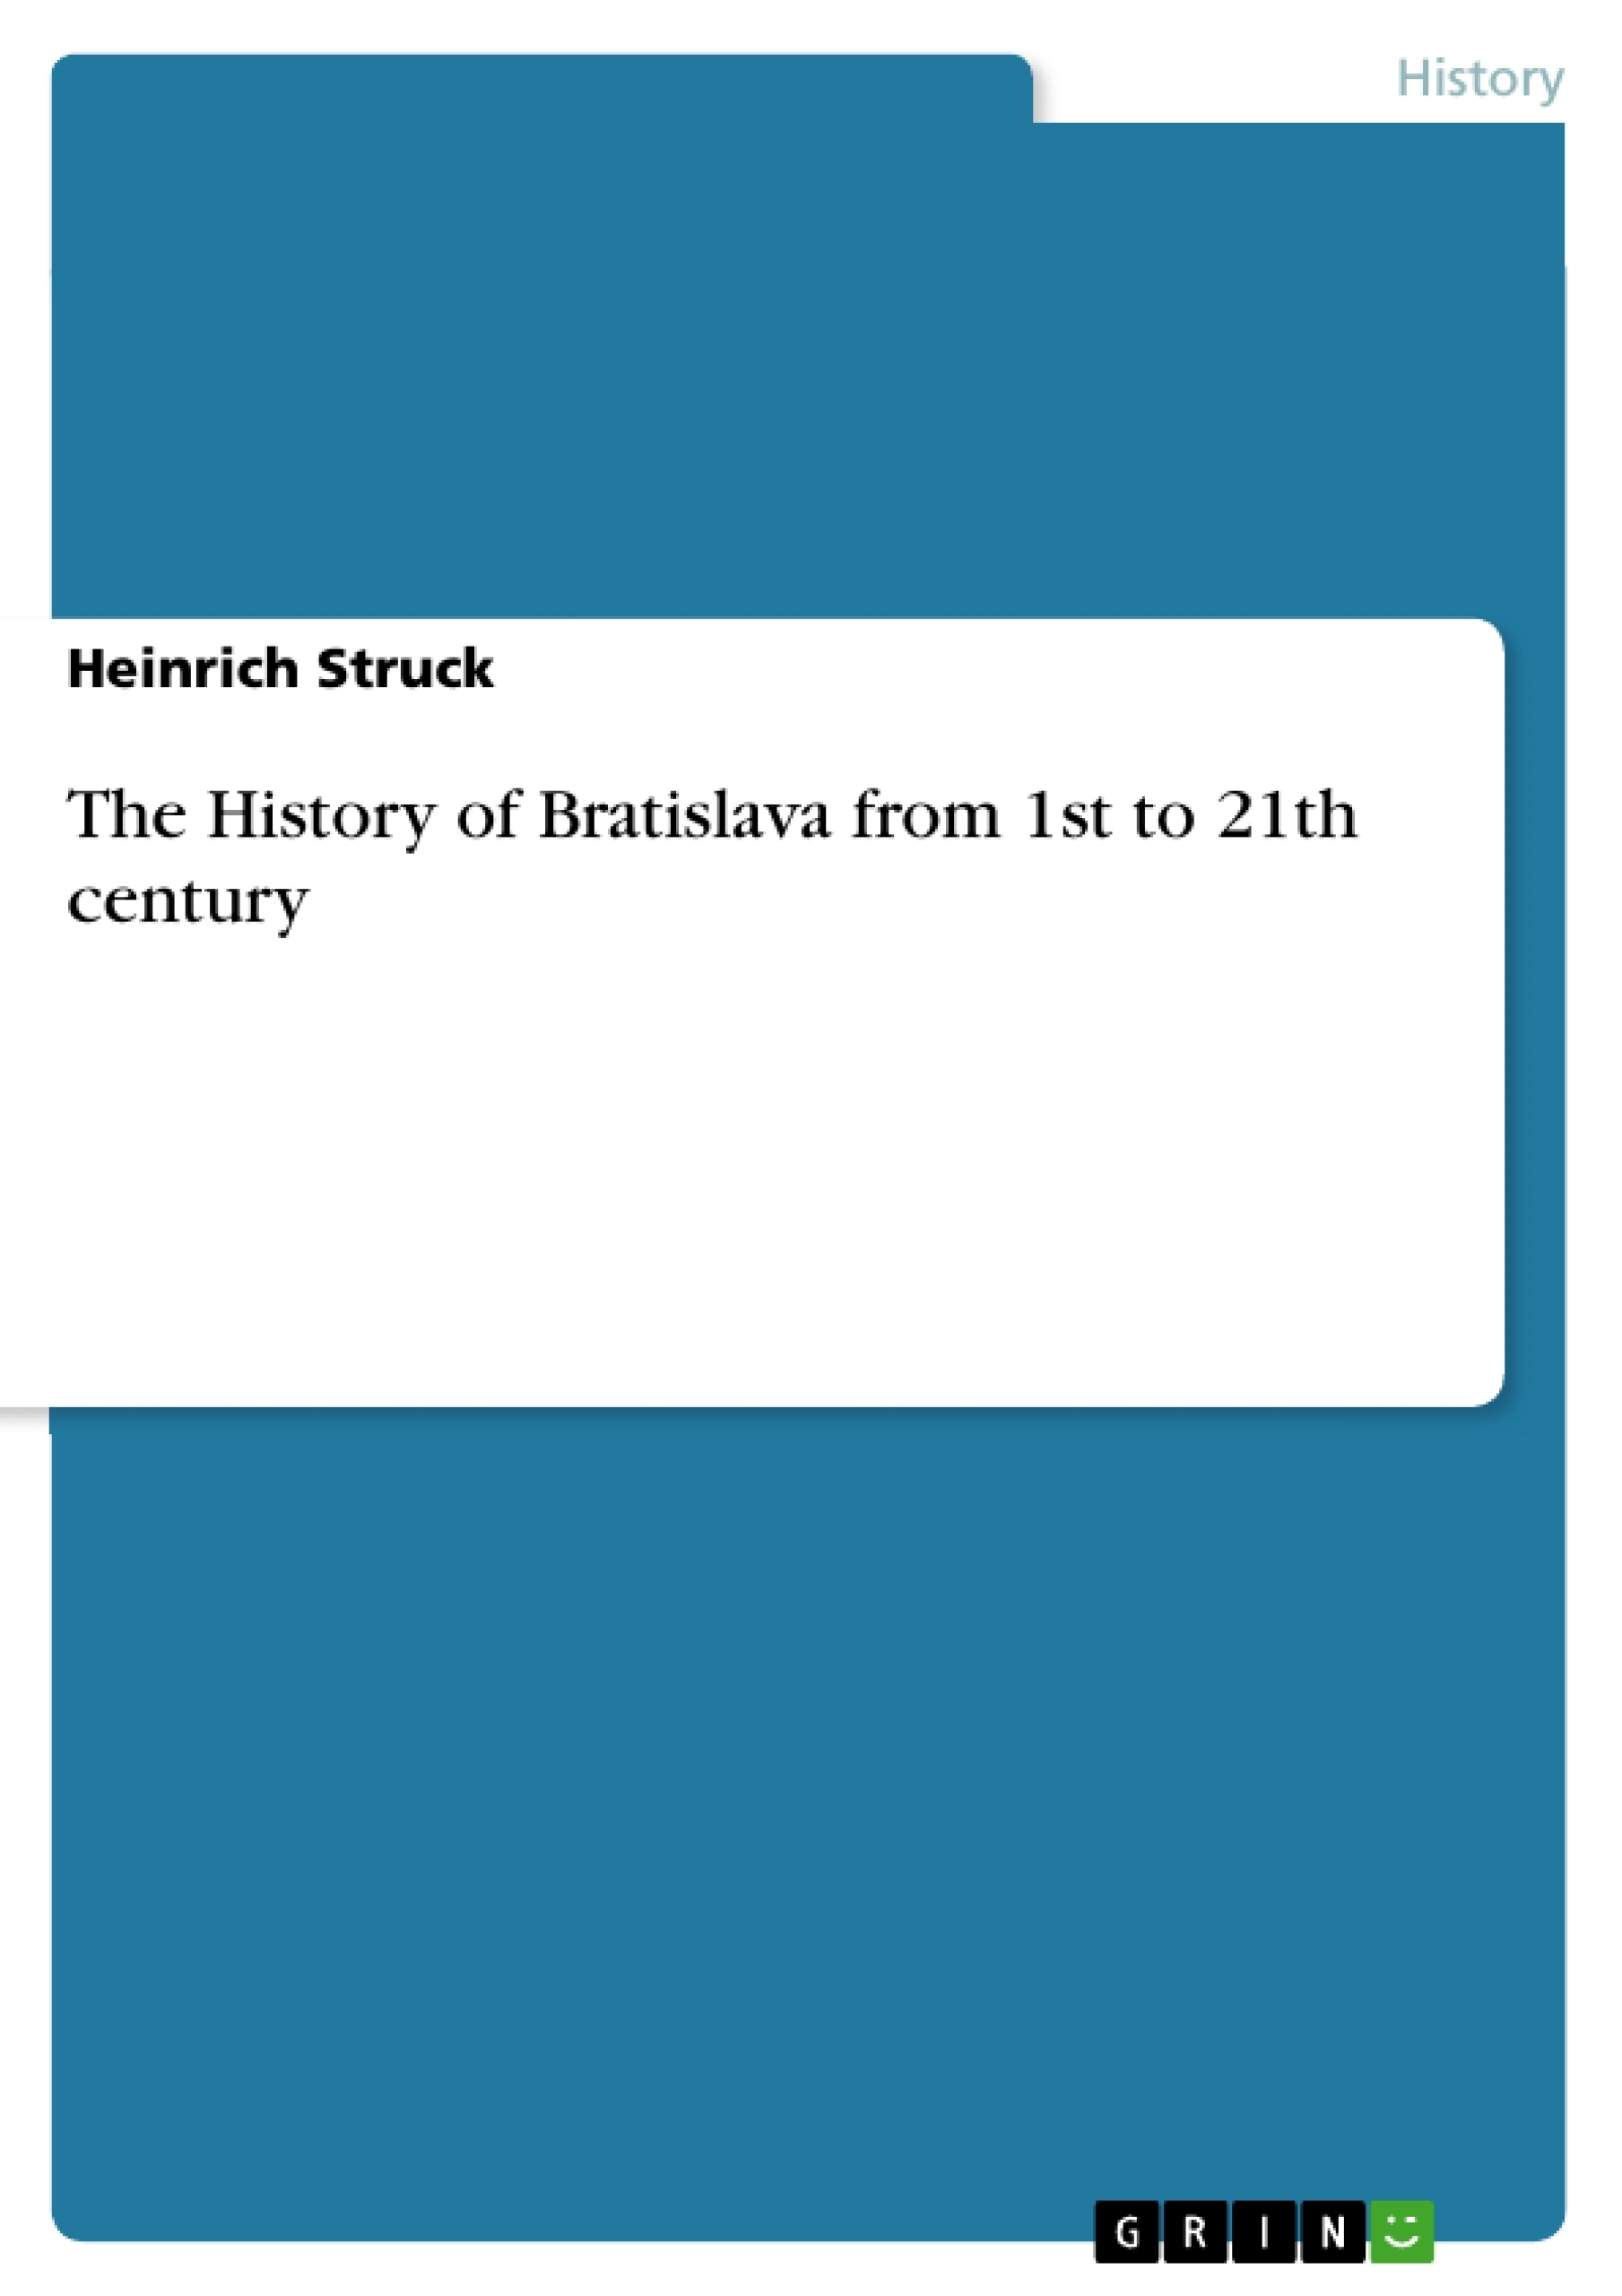 Titre: The History of Bratislava from 1st to 21th century